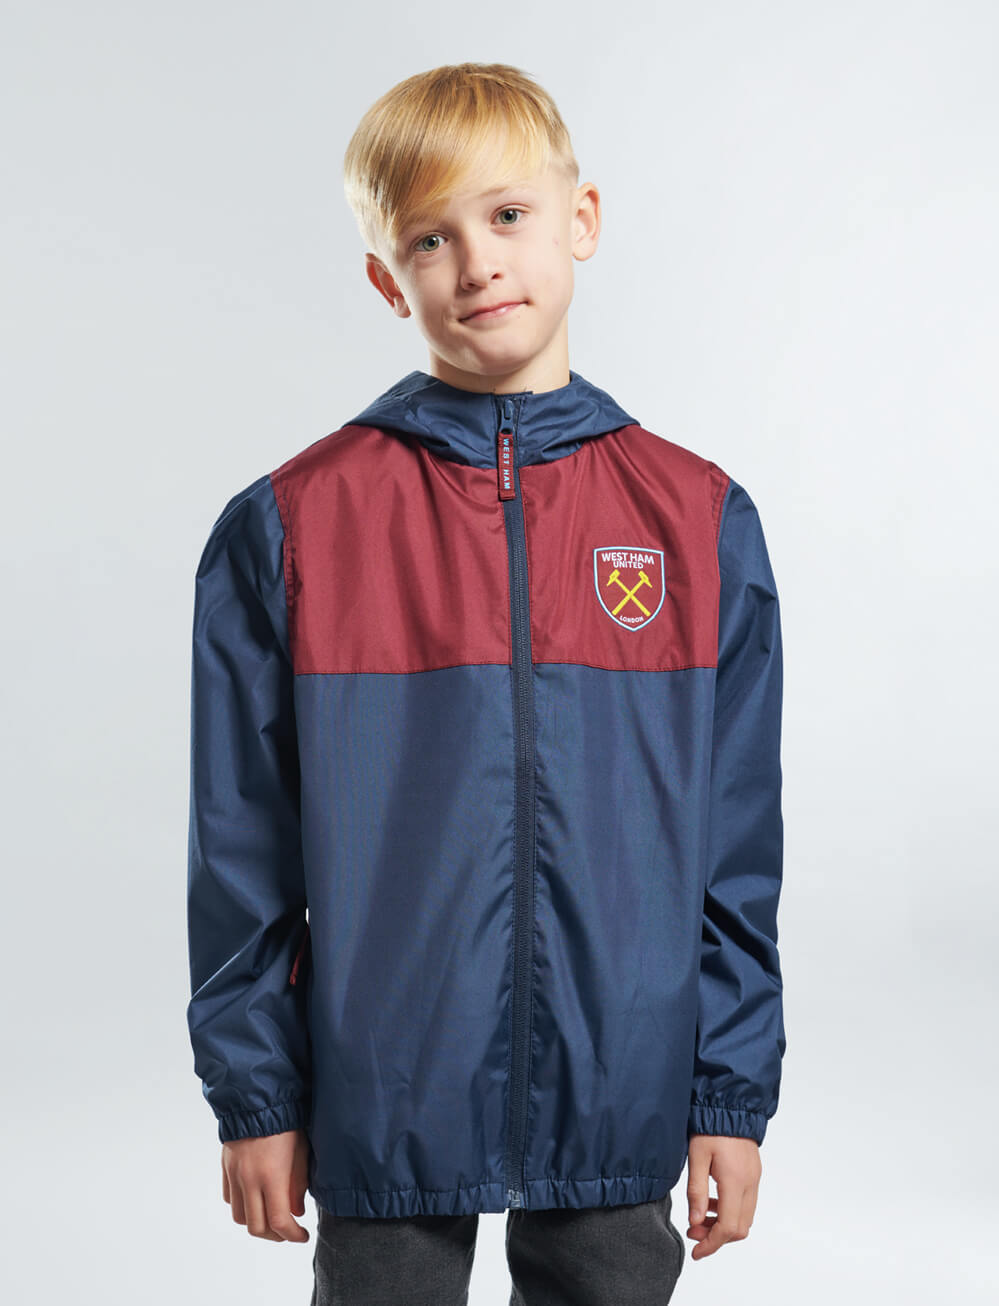 Official West Ham United Kids Shower Jacket - Navy - The World Football Store